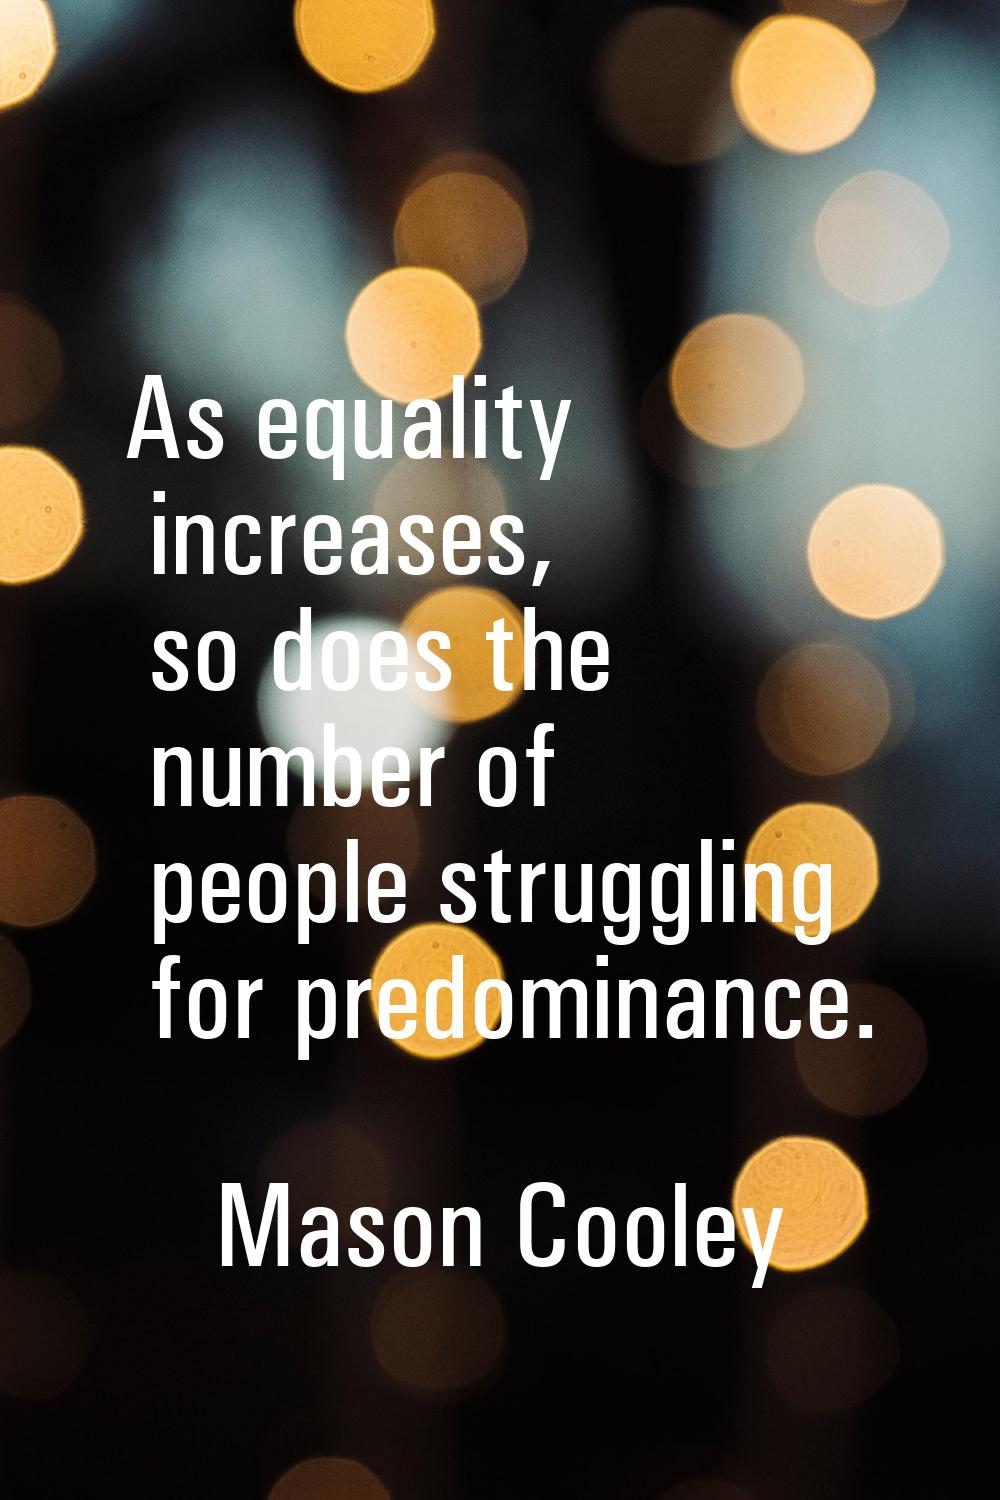 As equality increases, so does the number of people struggling for predominance.